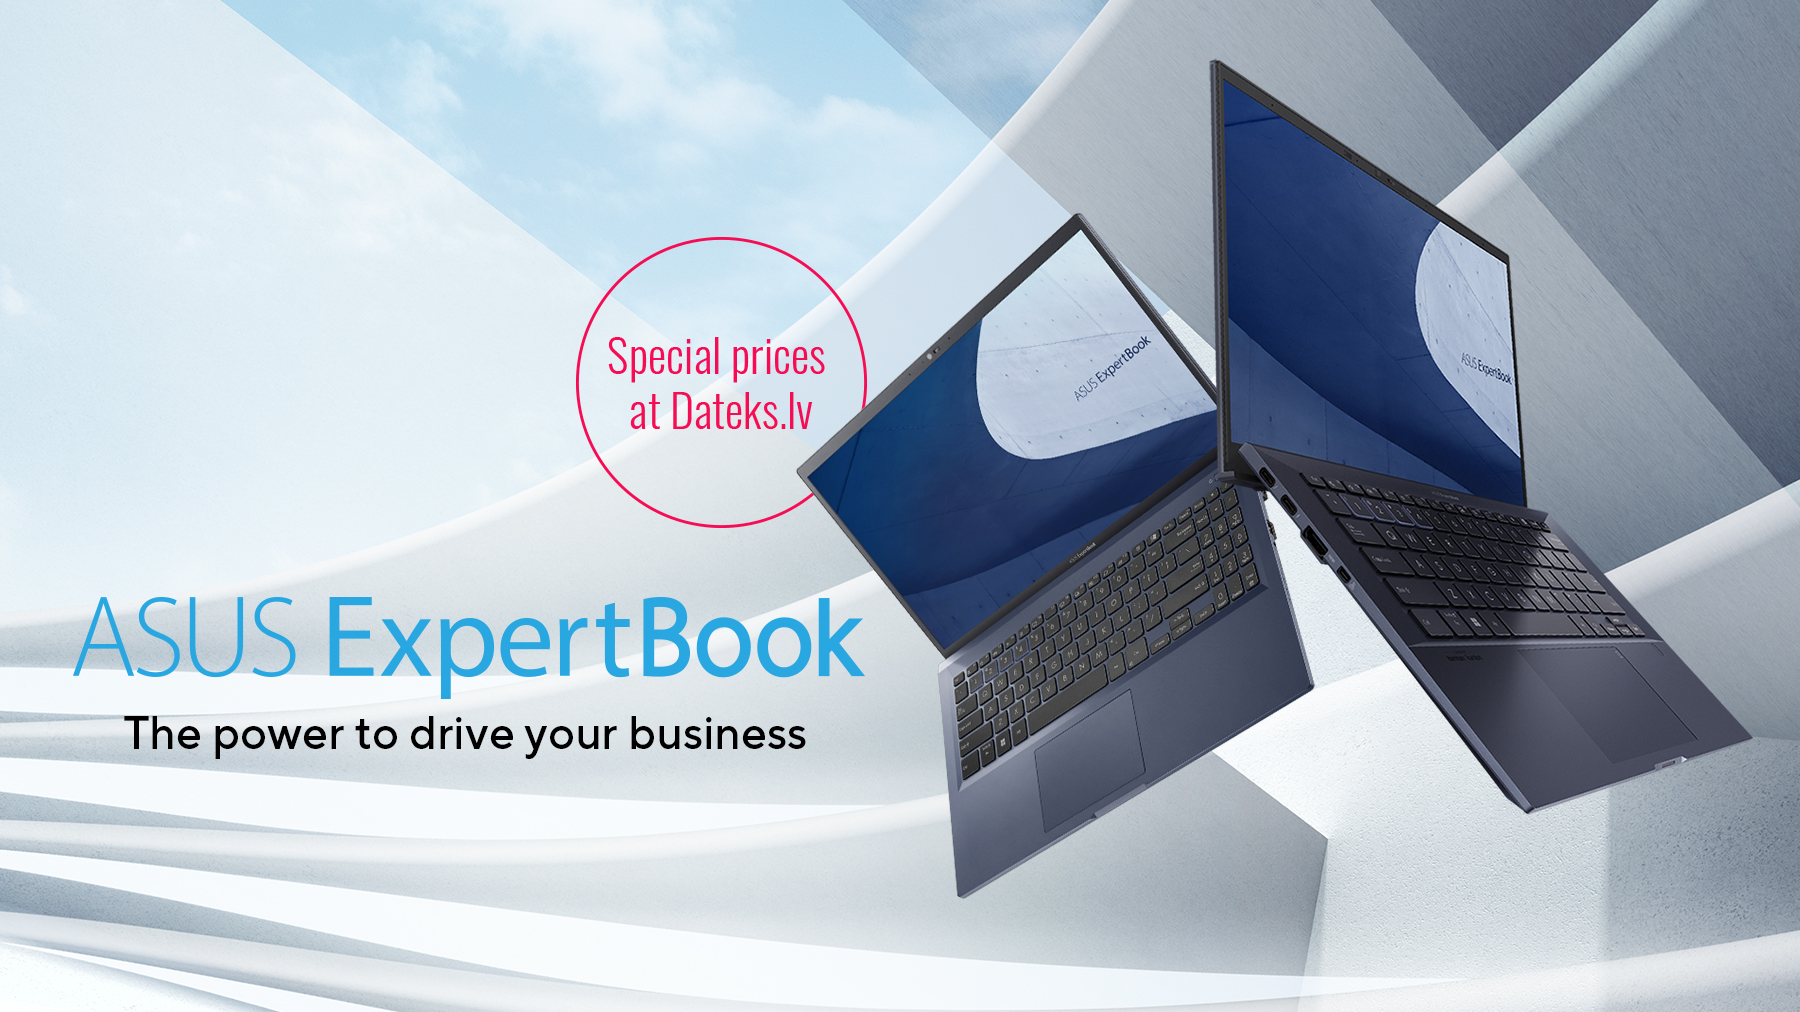 Special prices for ExpertBook models at Dateks.lv. The best time to purchase laptops for your business!